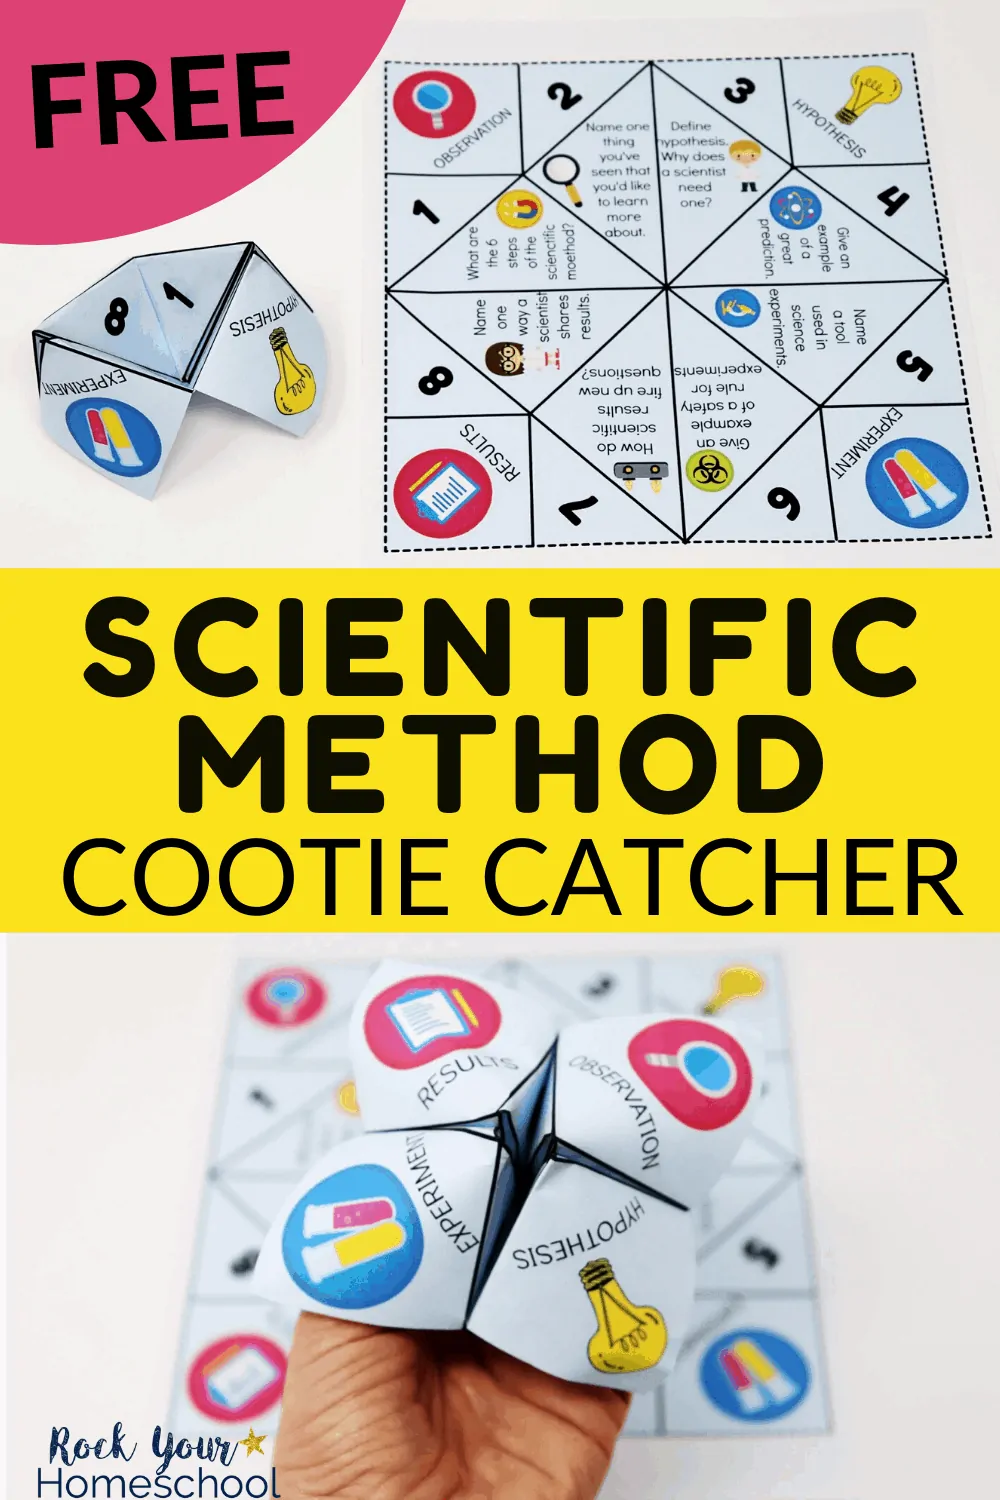 Free Scientific Method Cootie Catcher for Learning Fun